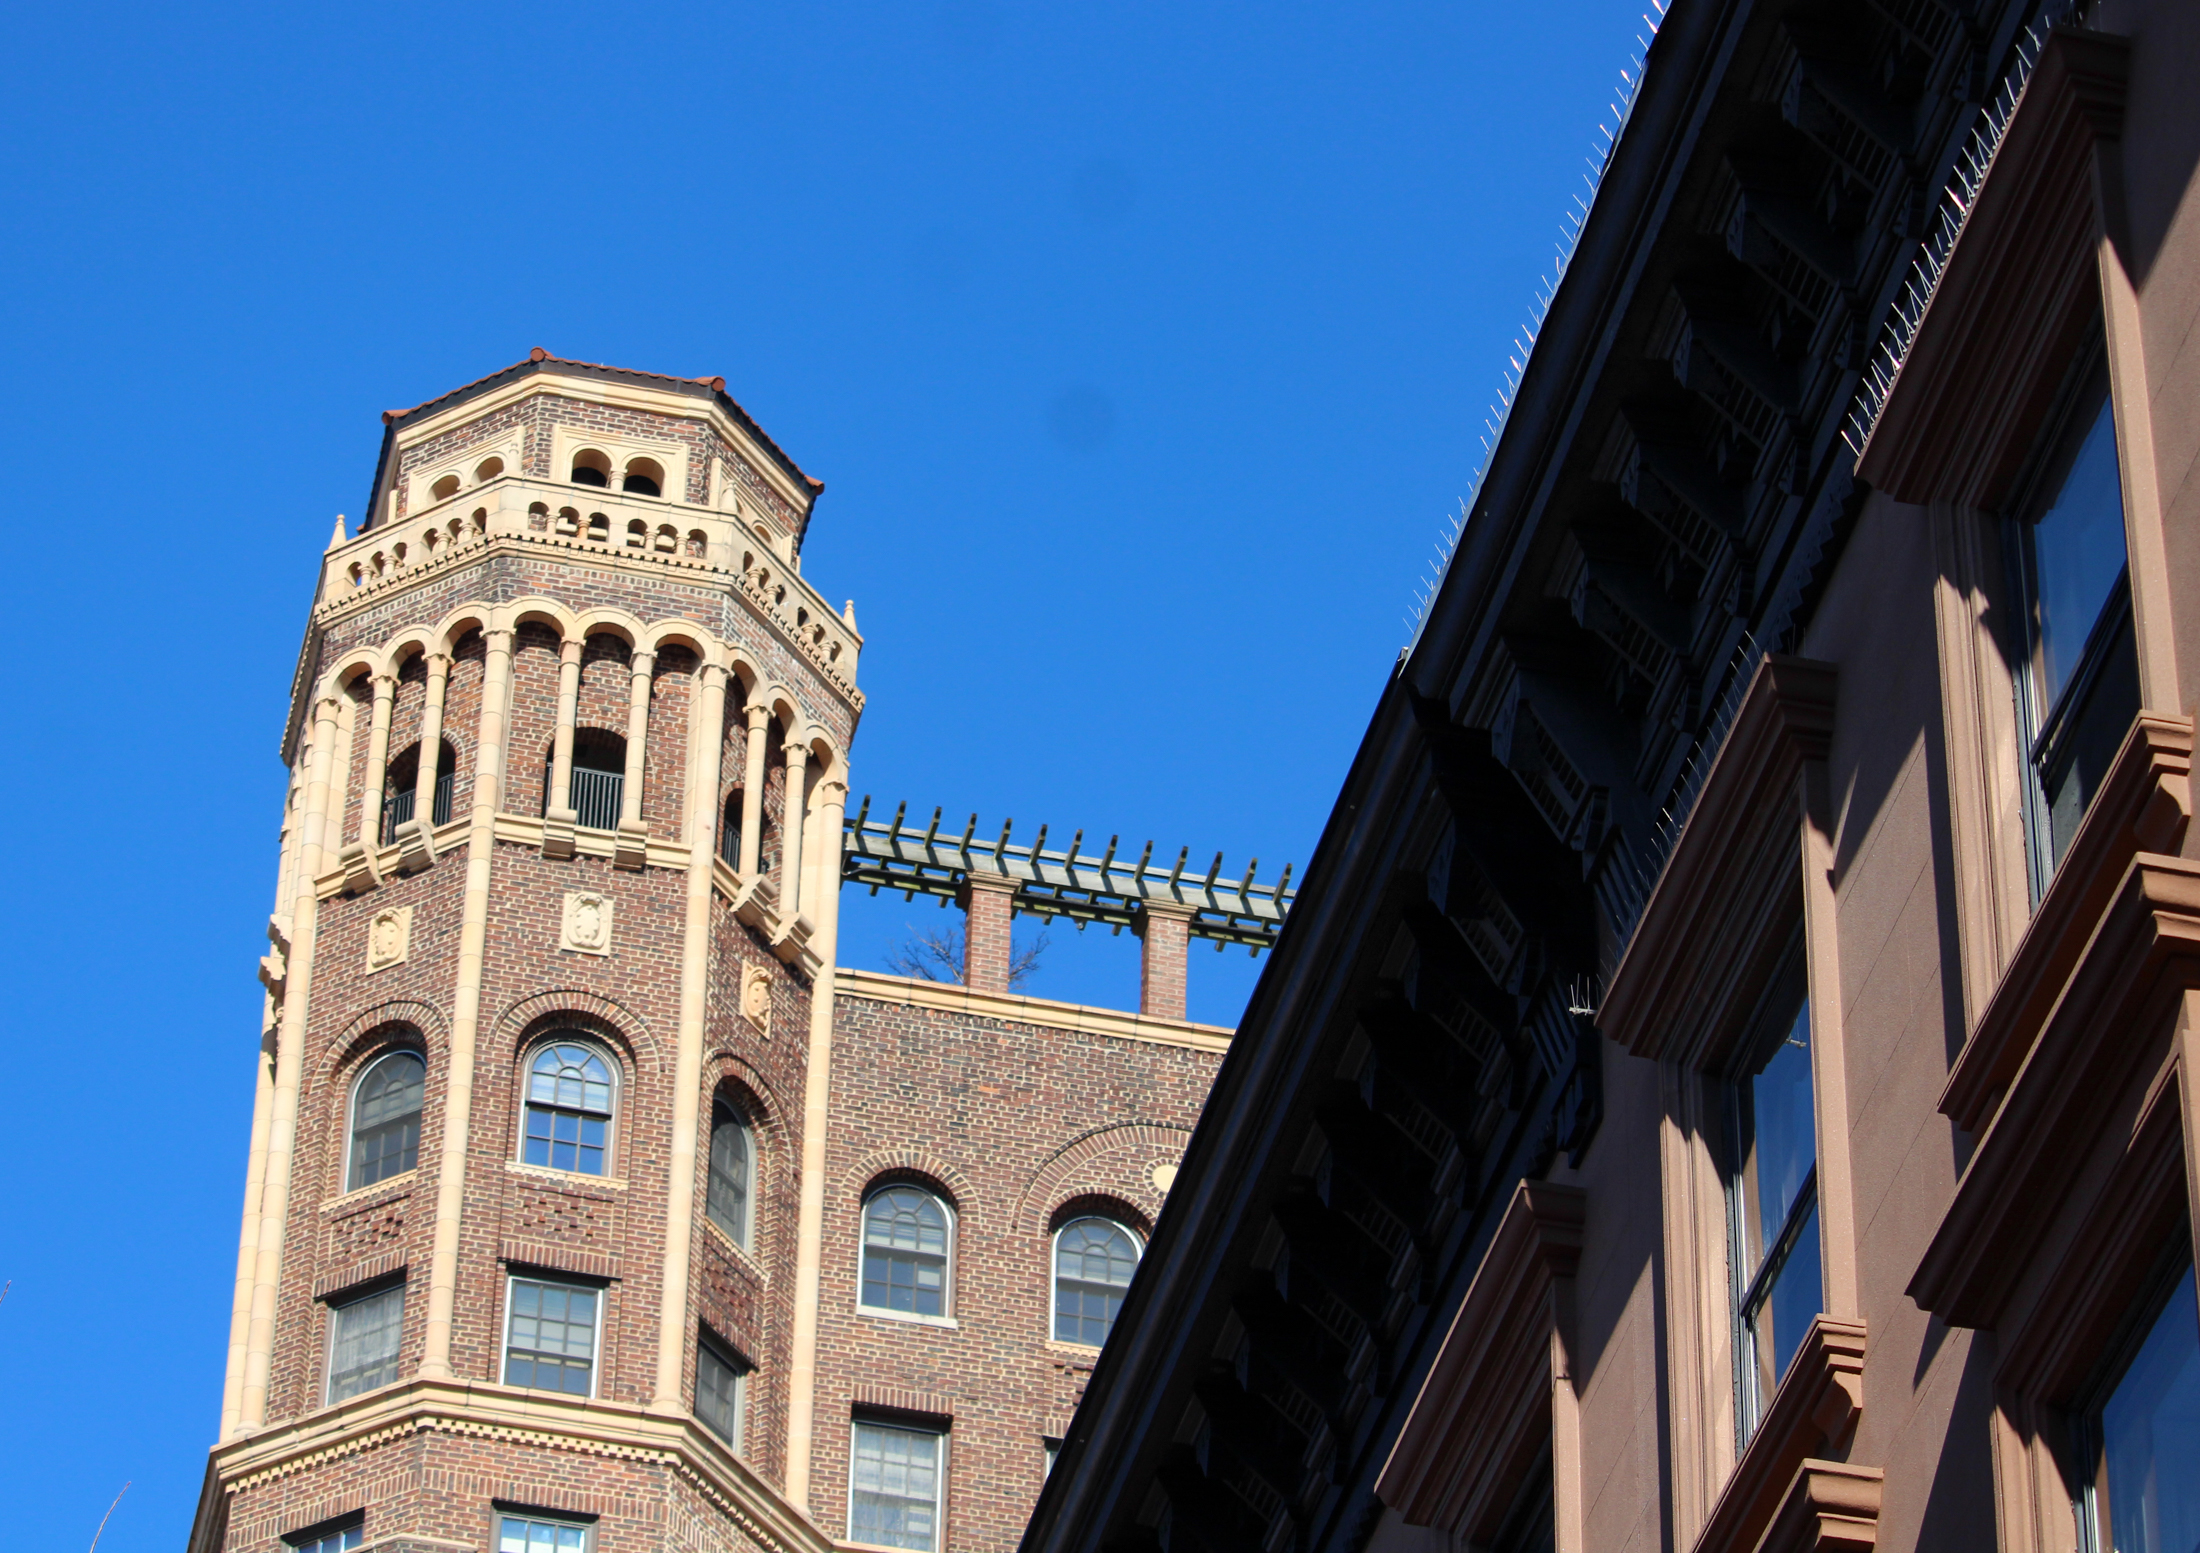 brooklyn - a brownstone and the tower fo the former Leverich Towers building